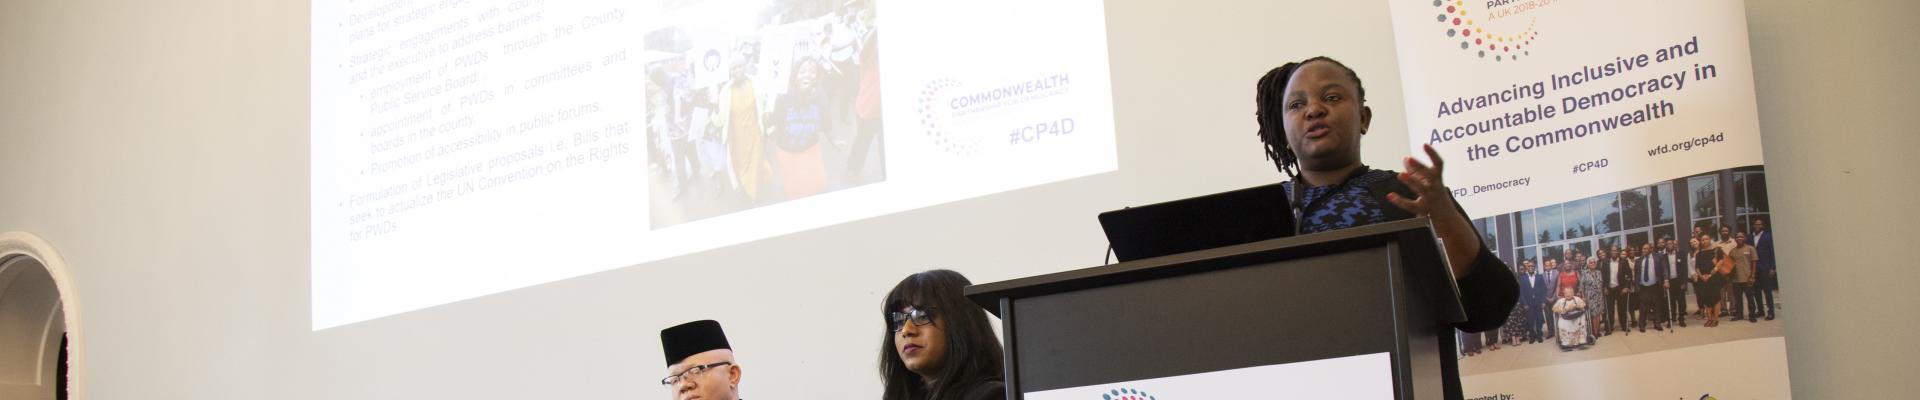 A person speaking at a podium at a CP4D conference